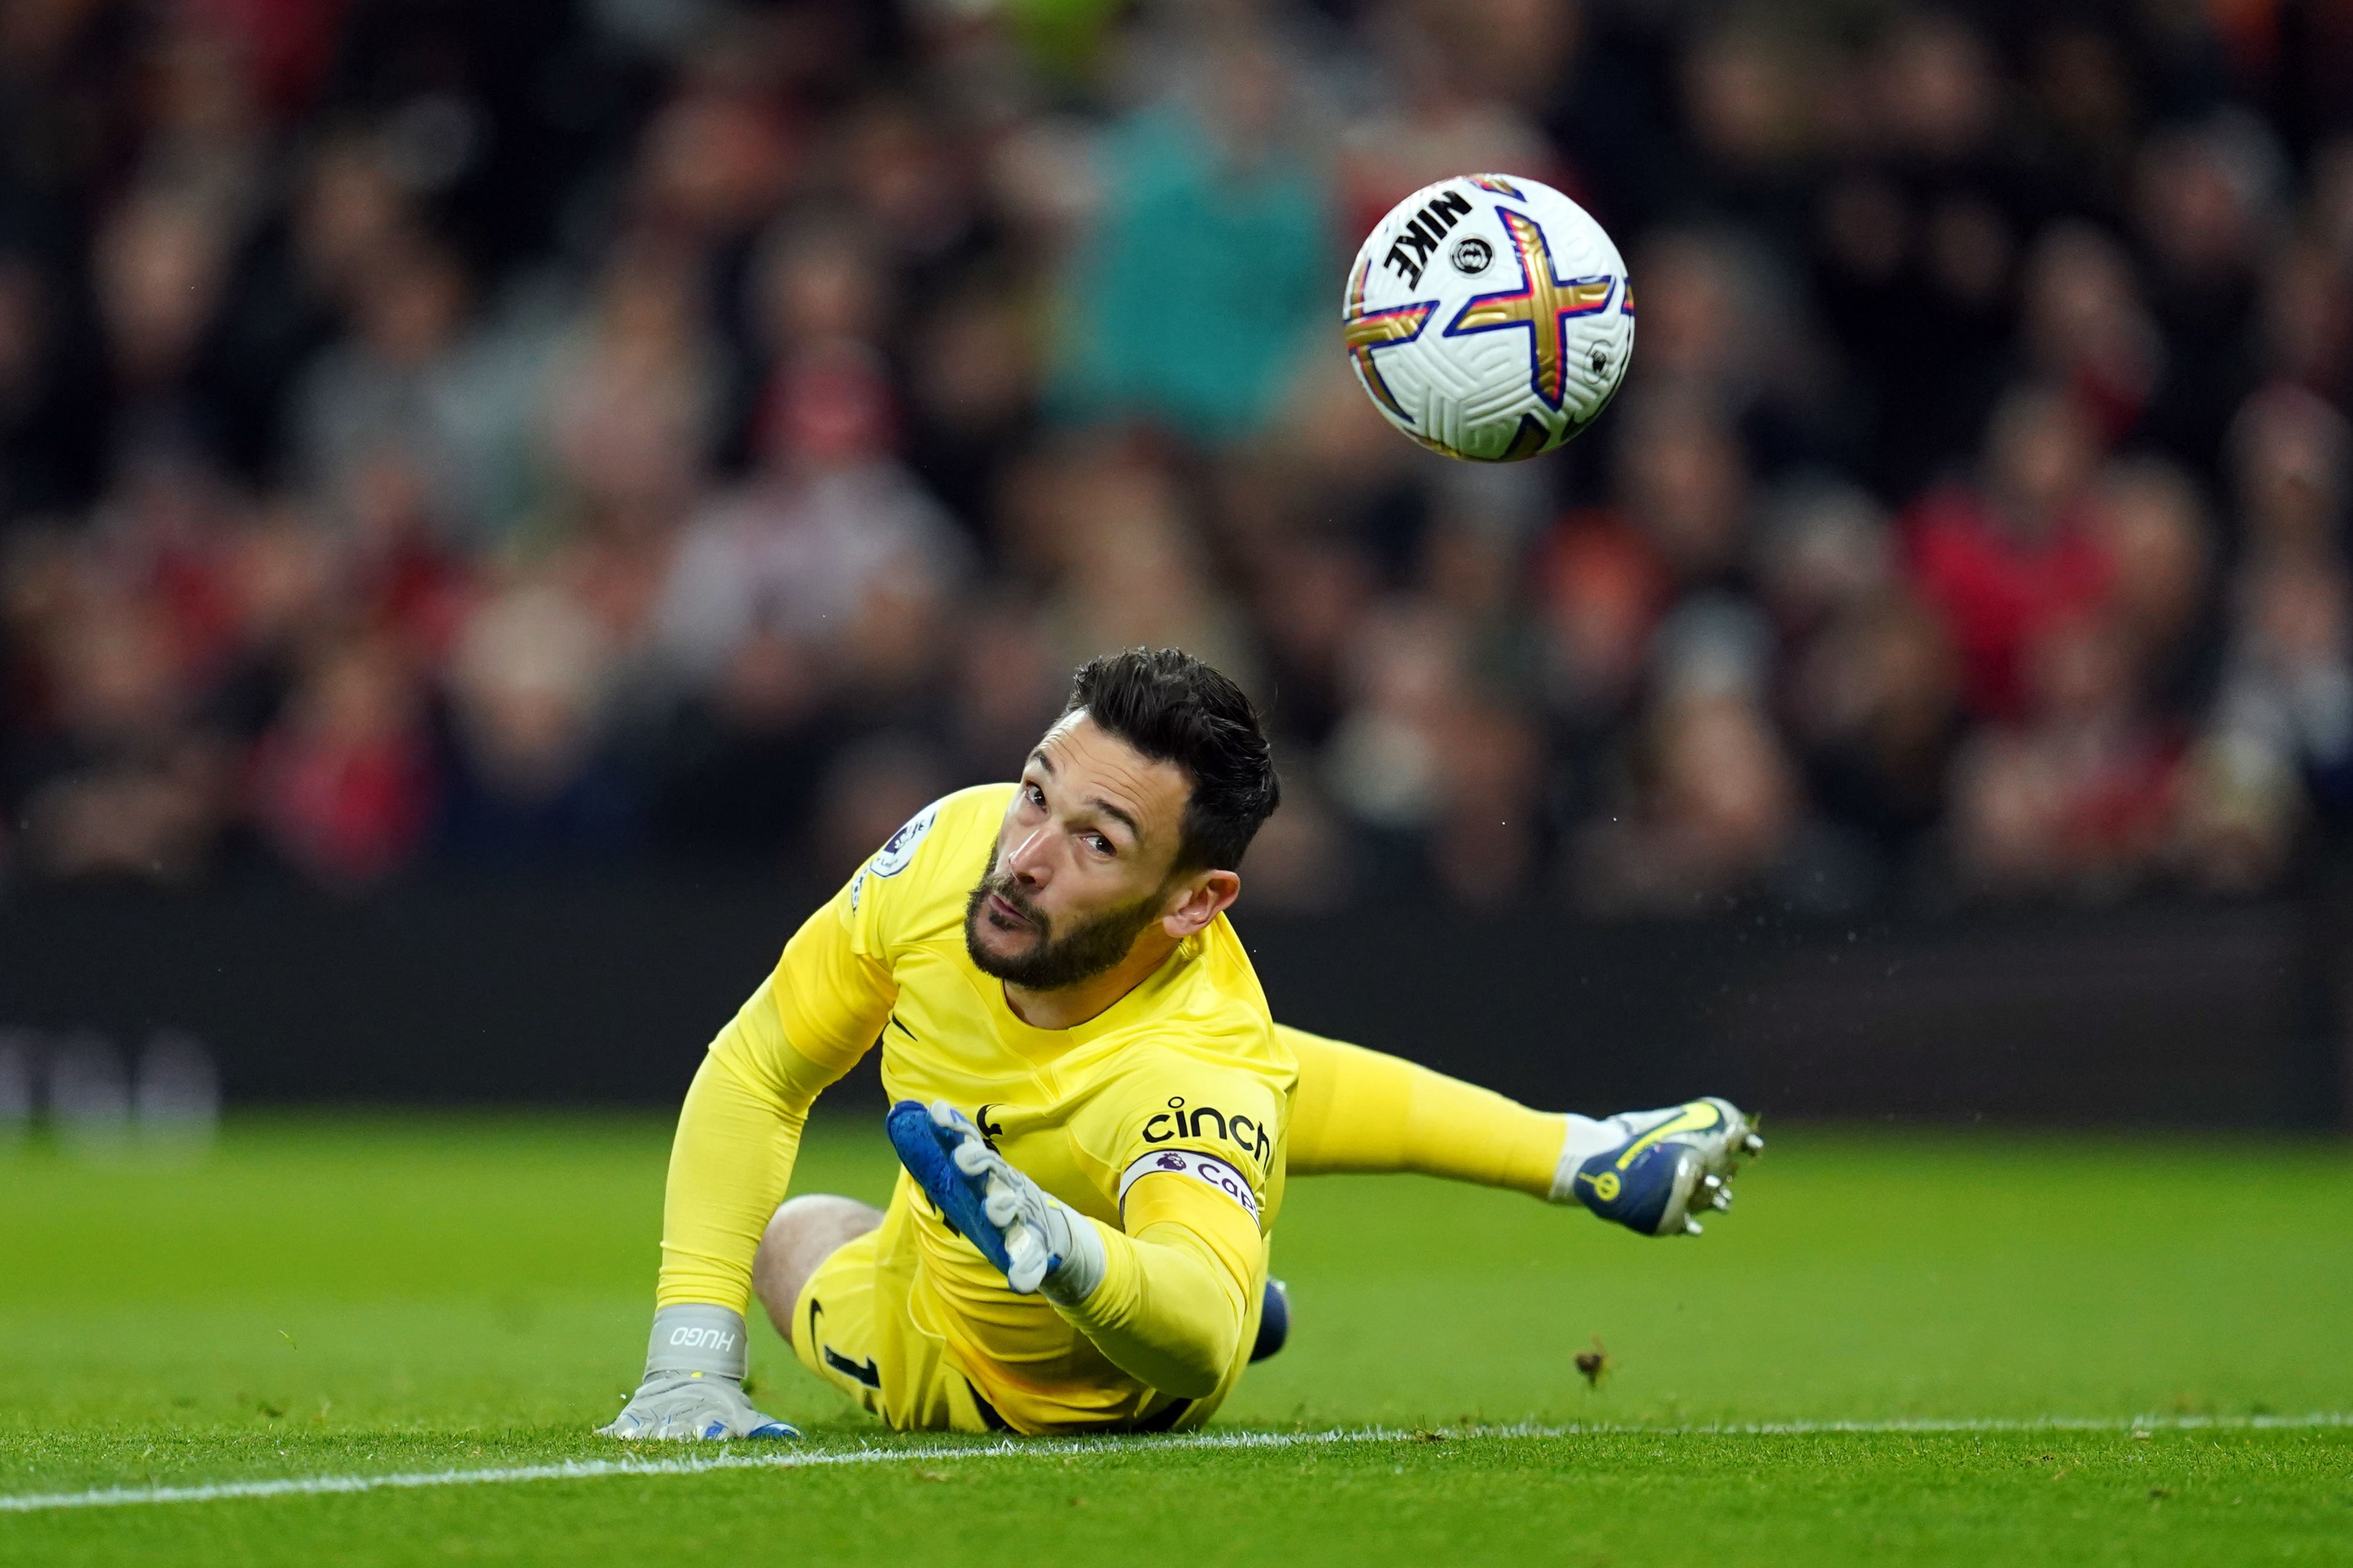 Hugo Lloris produced a number of impressive saves in Tottenham’s 2-0 defeat at Manchester United (Nick Potts/PA)